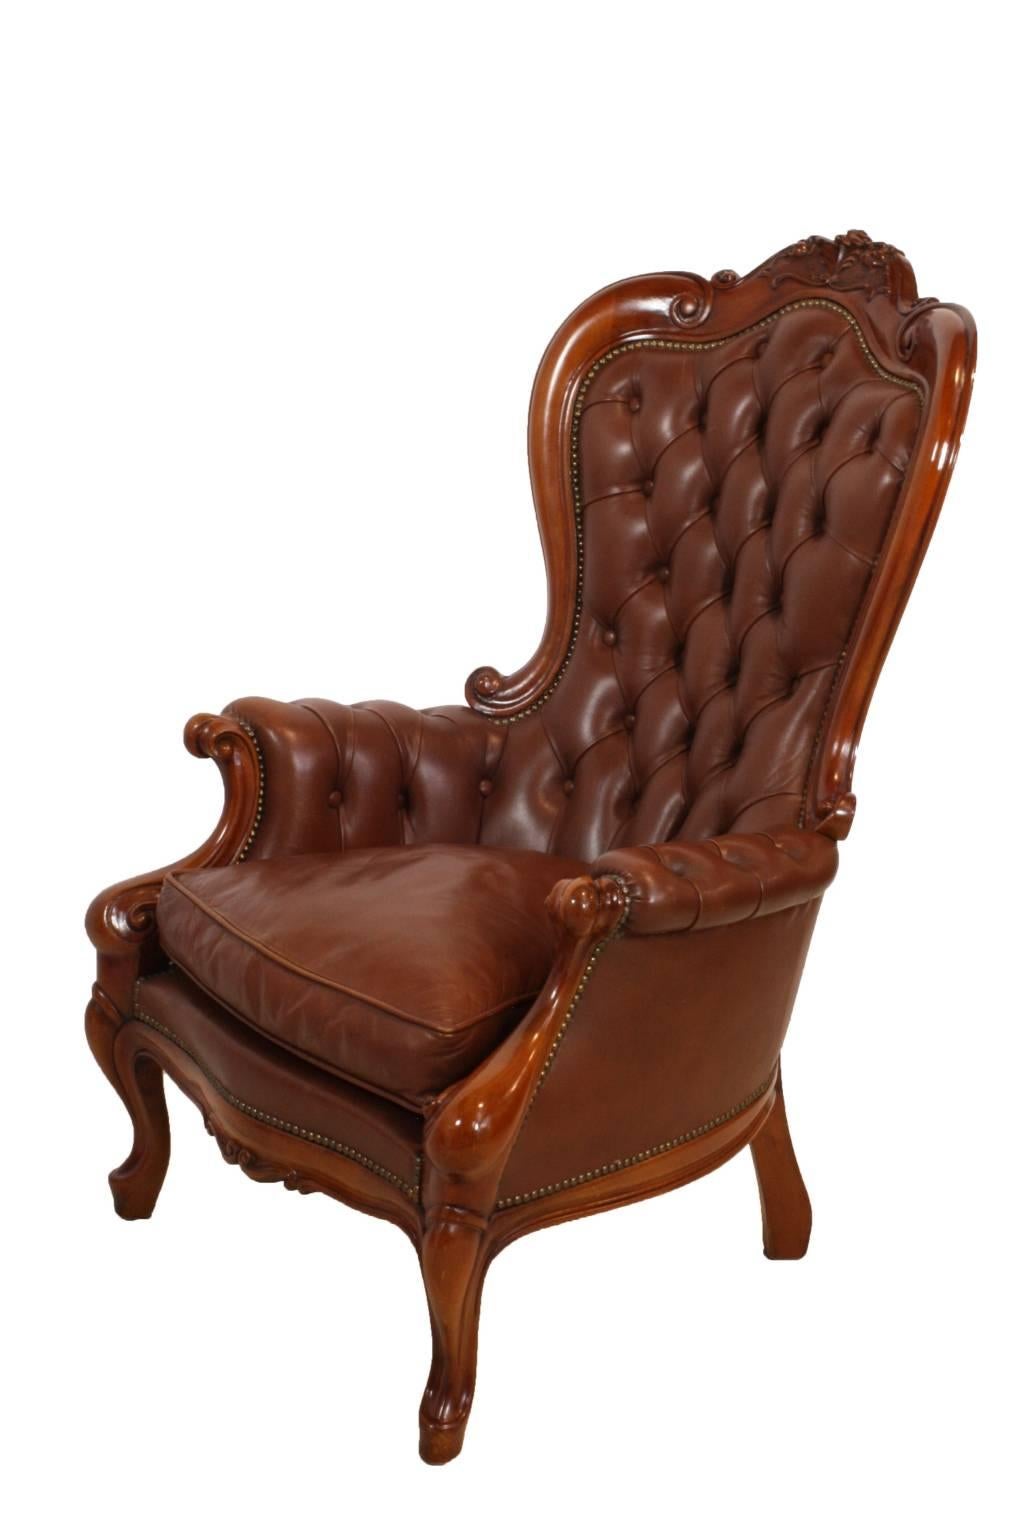 A pair of beautiful mahogany chairs with brown tufted leather and brass pinning in a classic Victorian style.